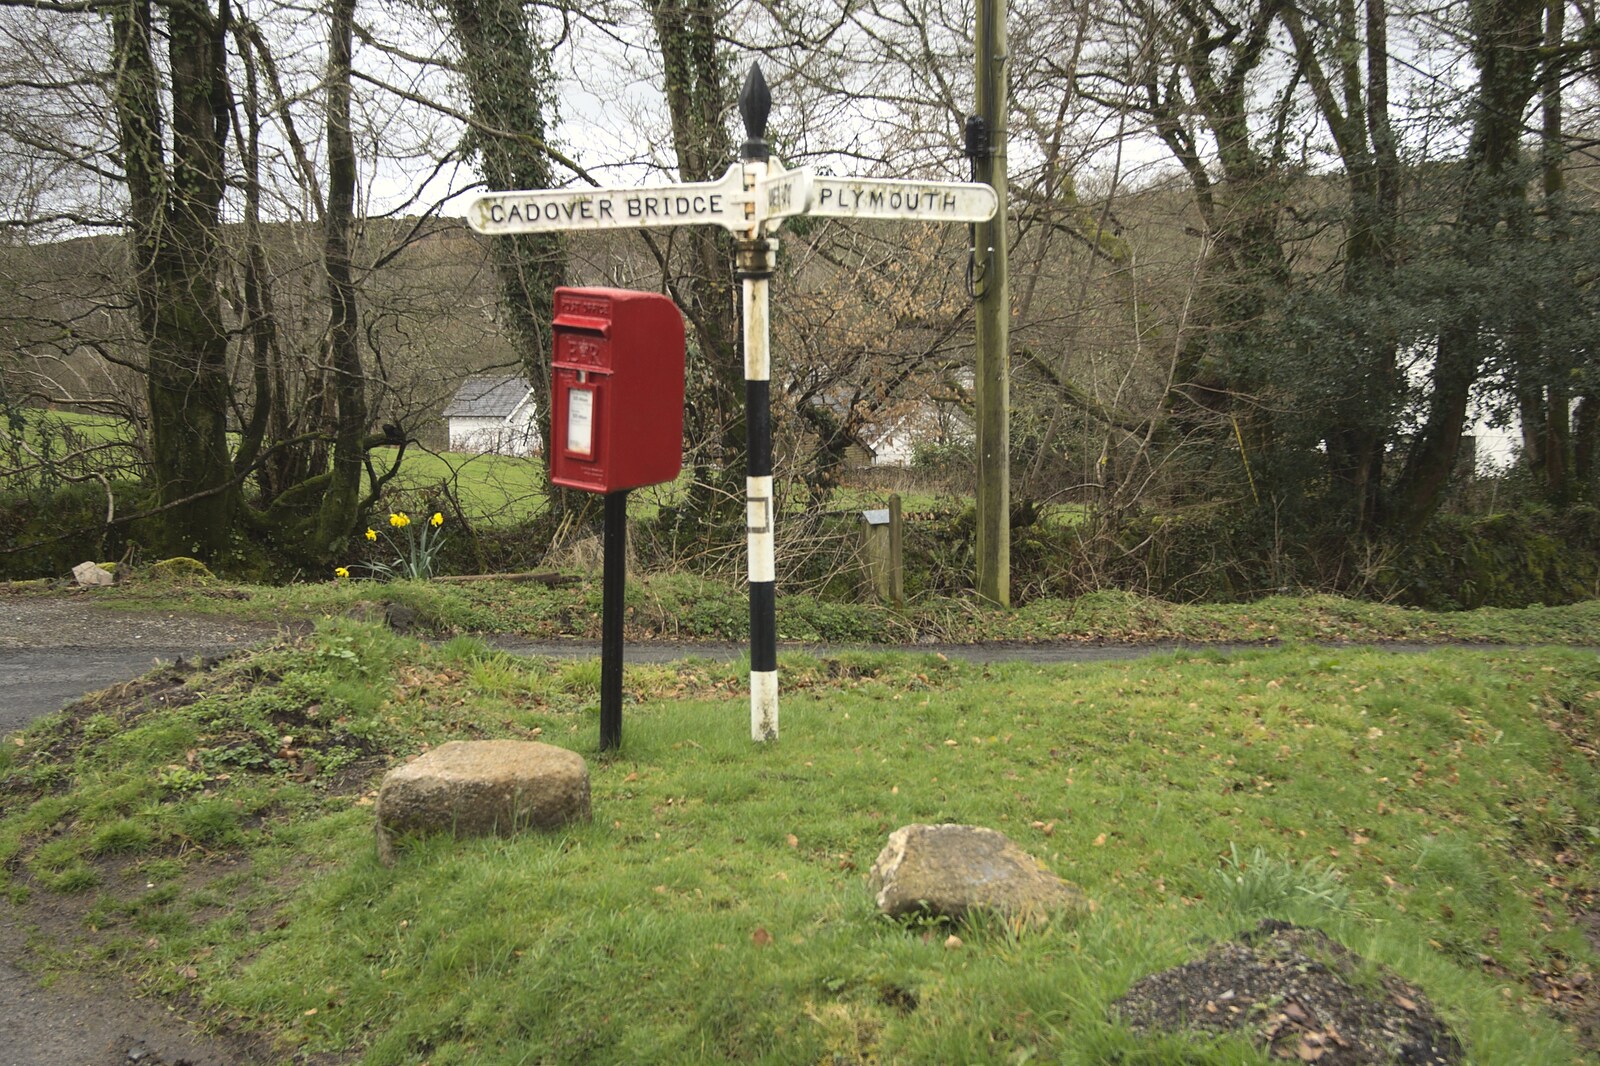 Roadsign and postbox at Hoo Meavy from Easter in Chagford and Hoo Meavy, Devon - 3rd April 2010